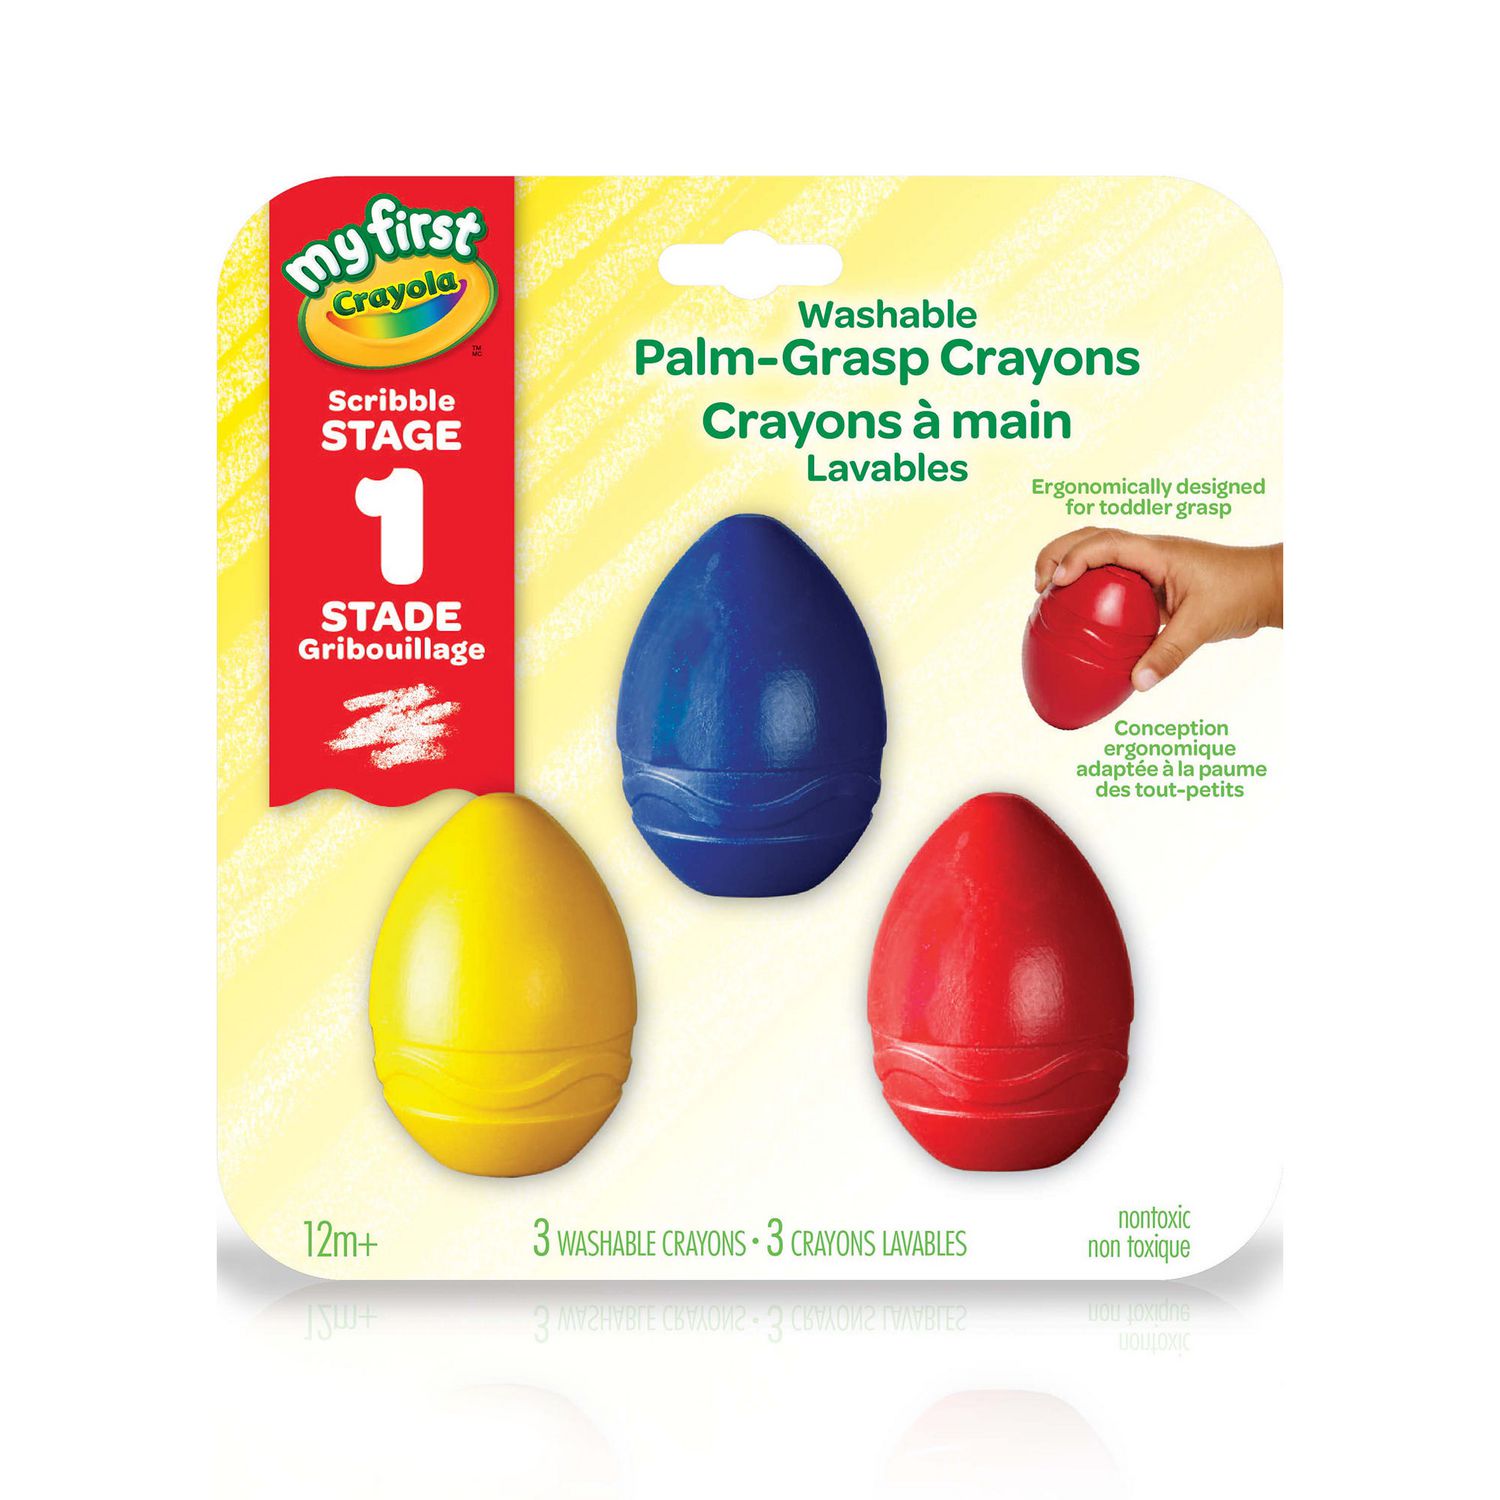 Crayola My First Palm Grip Crayons, 3ct, Coloring for Toddlers